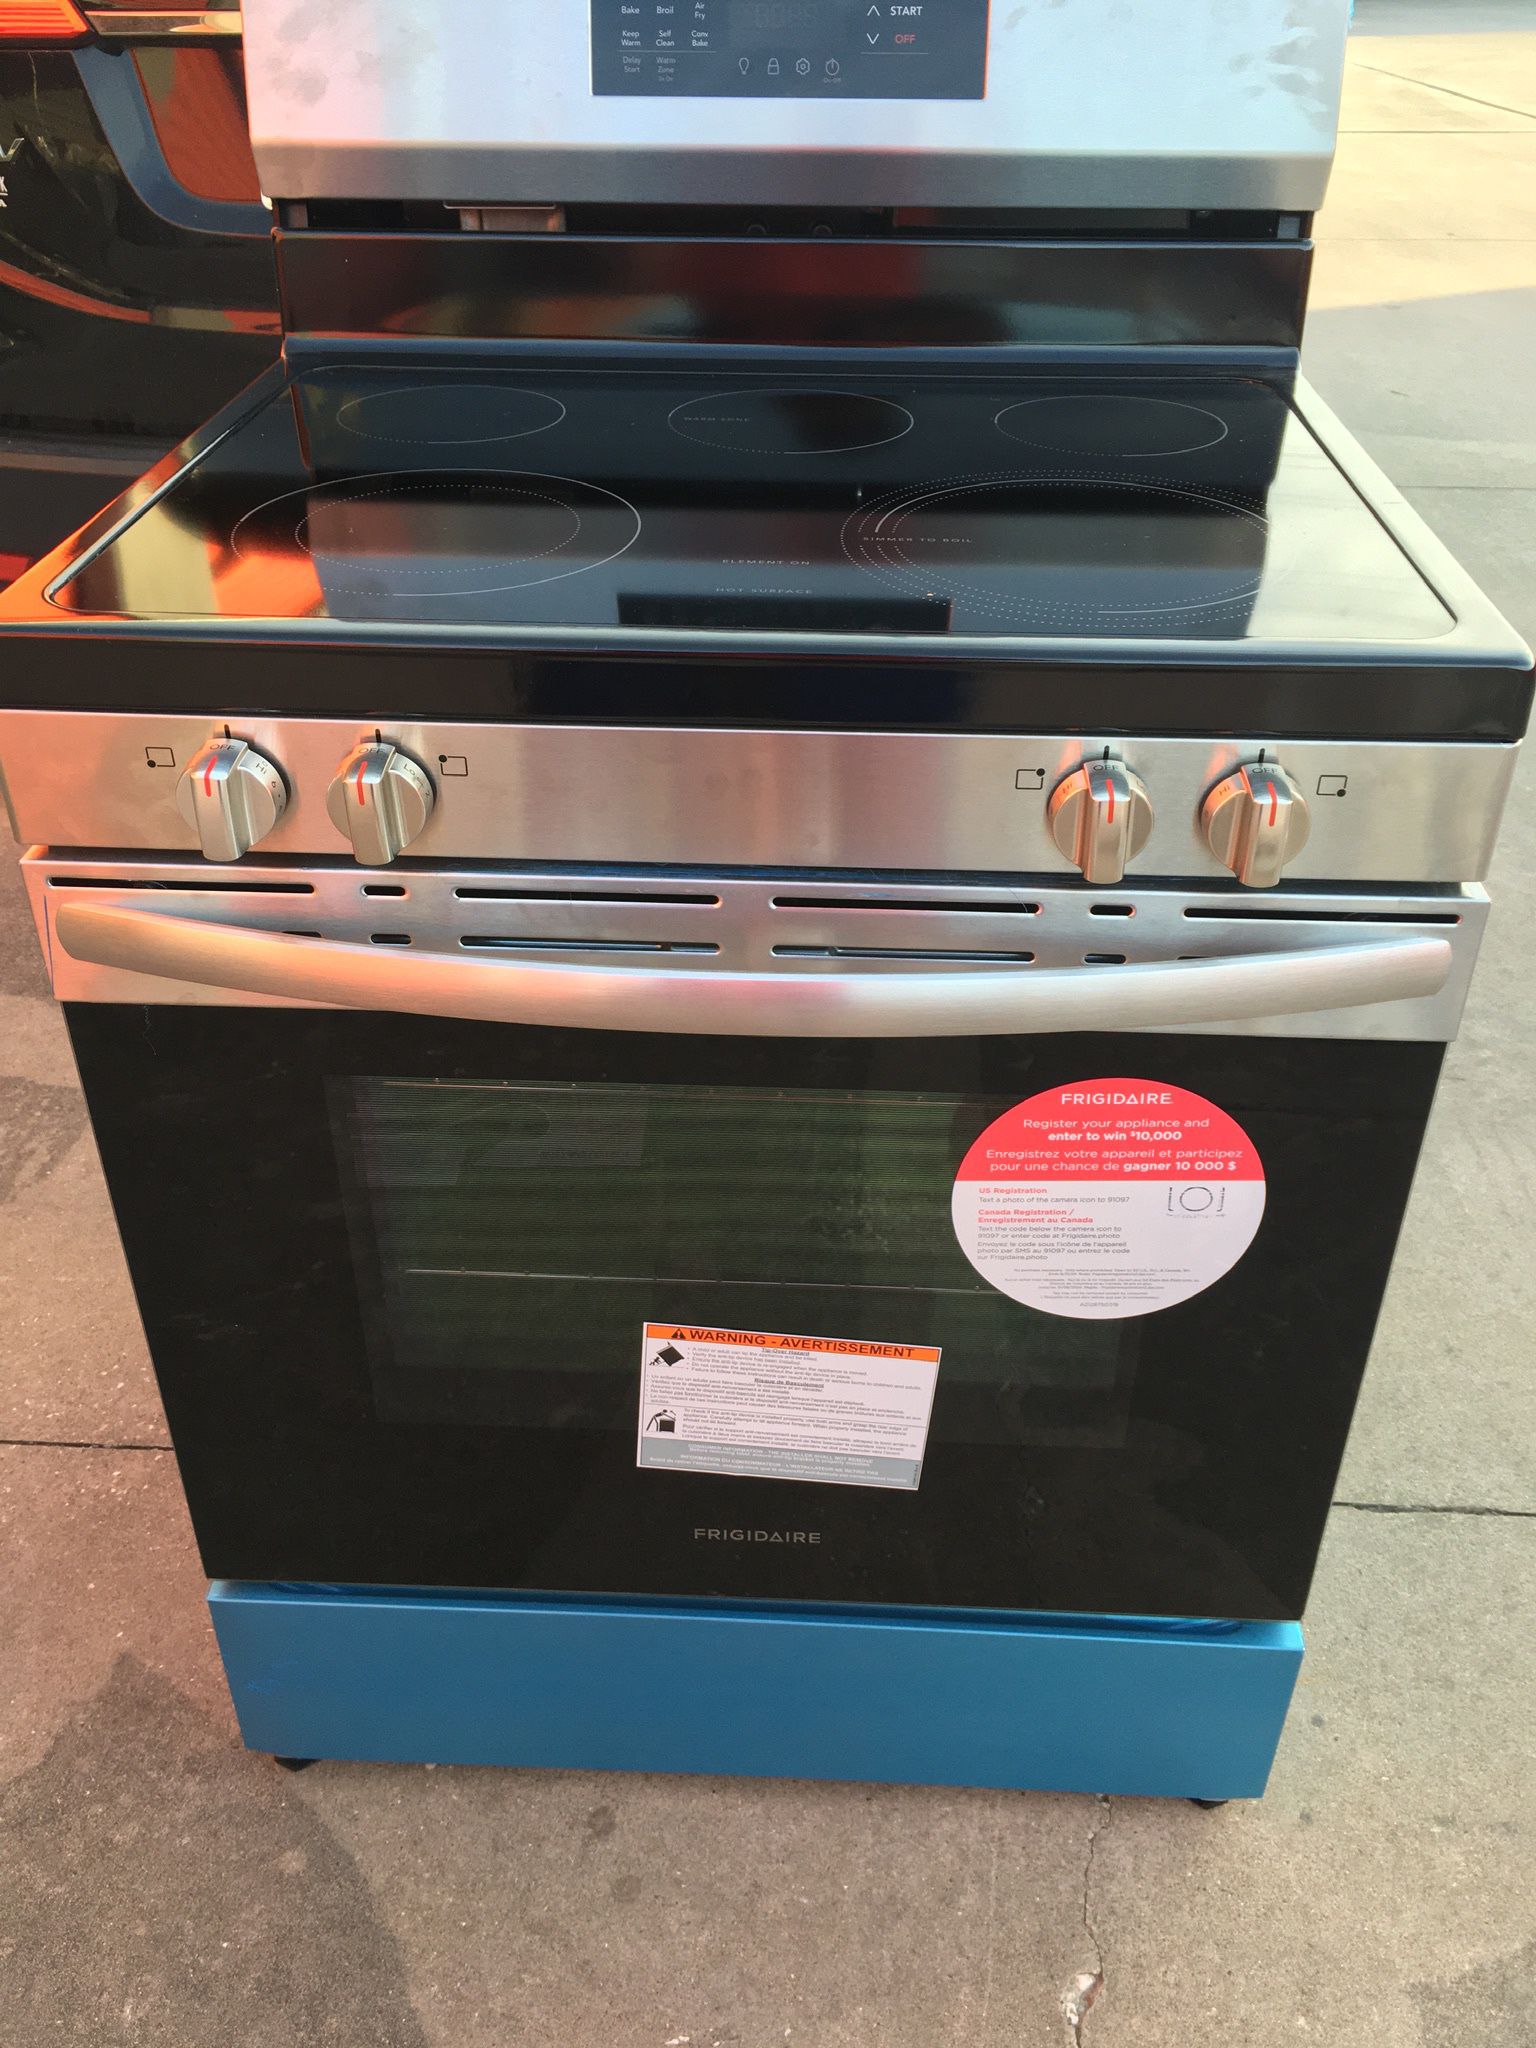 New Scratch And Dent Frigidaire 30-in Glass Top 5 Burners 5.3-cu ft Self-Cleaning Air Fry Freestanding Electric Range (Stainless Steel)$695.00 O’B’O’